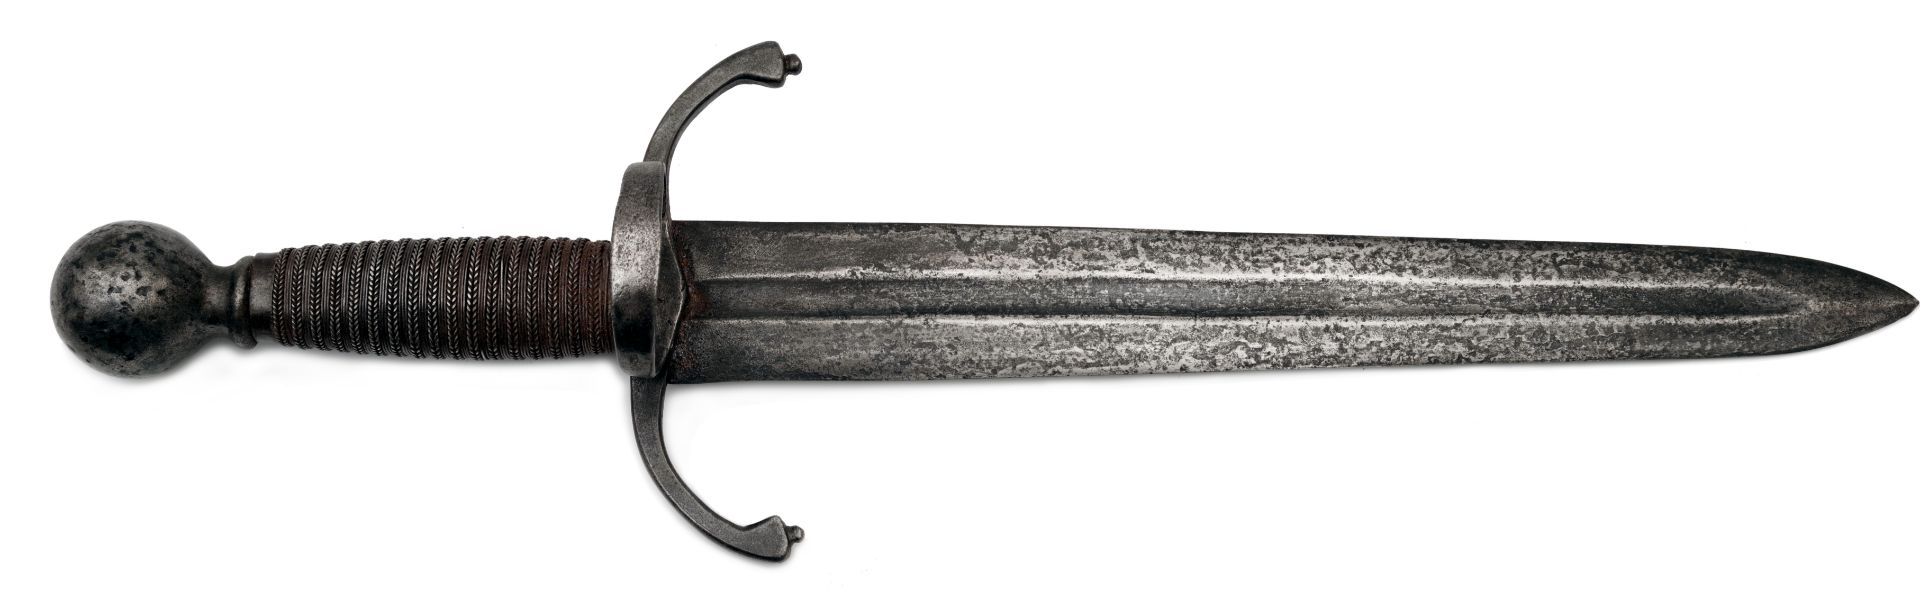 Left-handed dagger in style of 17th century